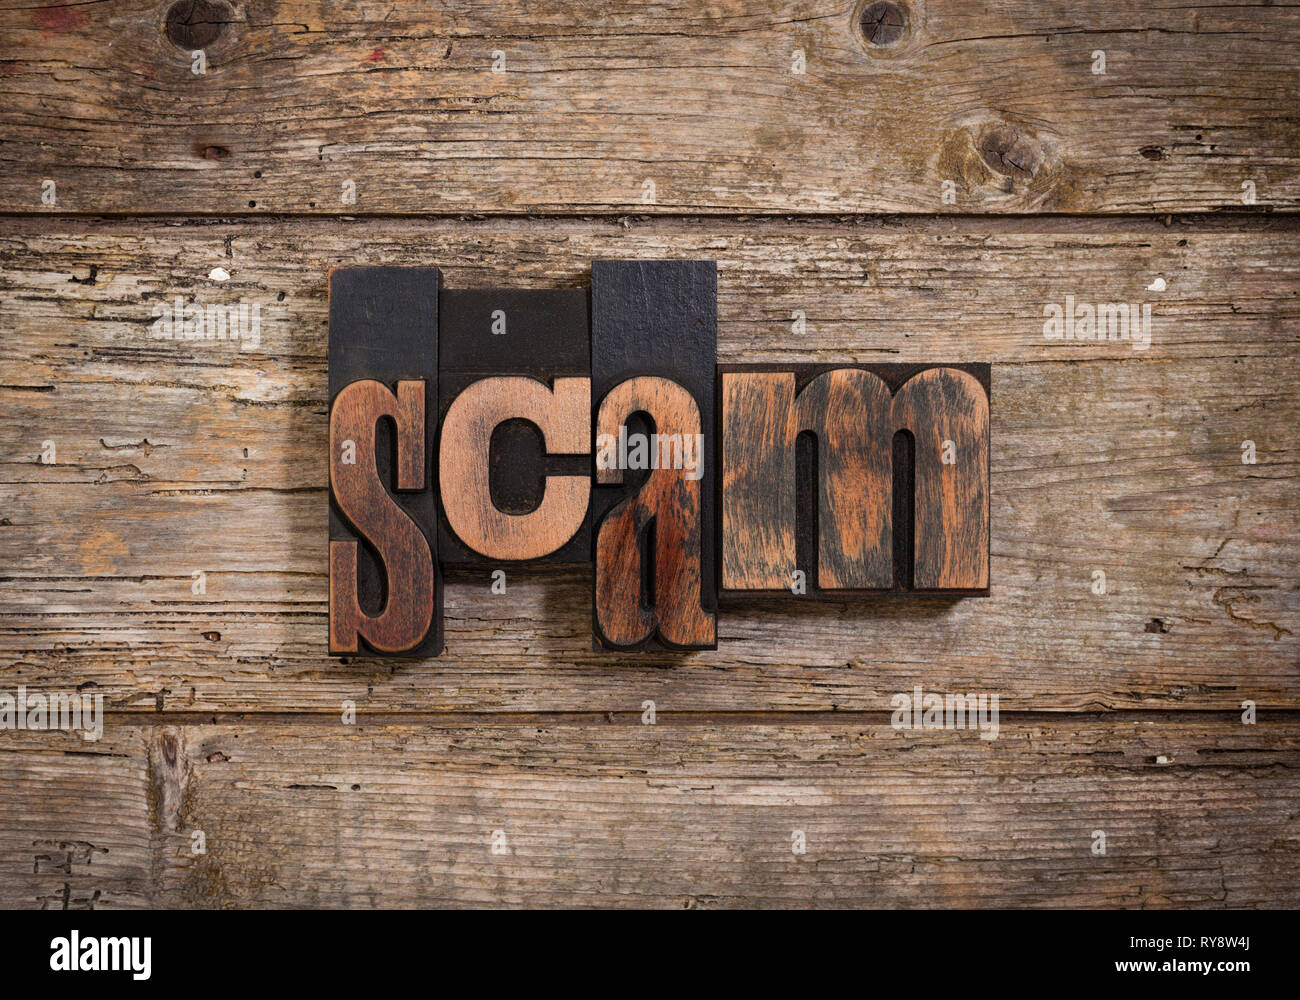 scam, single word set with vintage letterpress printing blocks on rustic wooden background Stock Photo